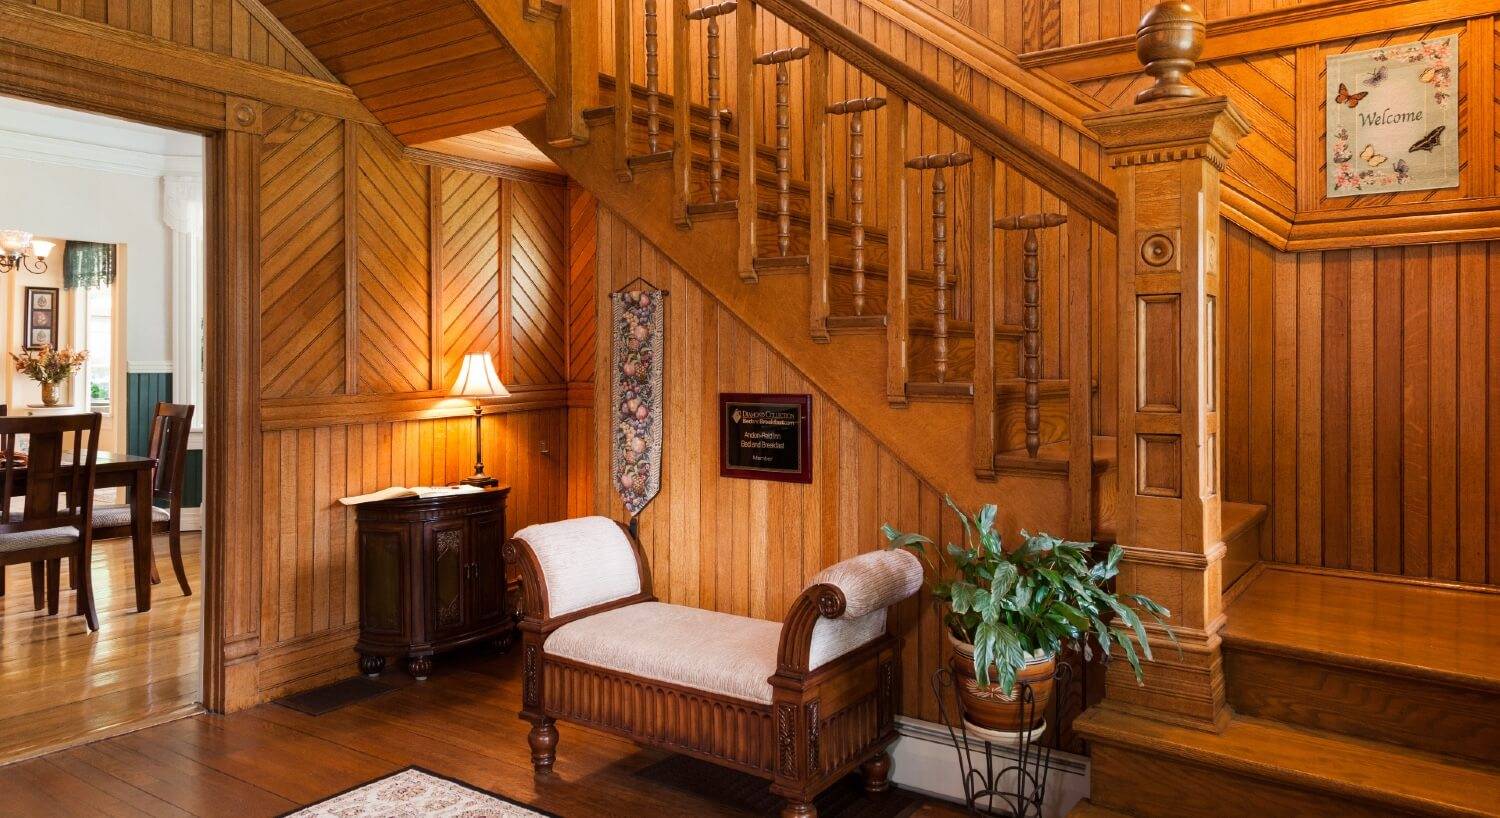 Front foyer of a home showing detailed wood paneled walls and staircase going upstairs